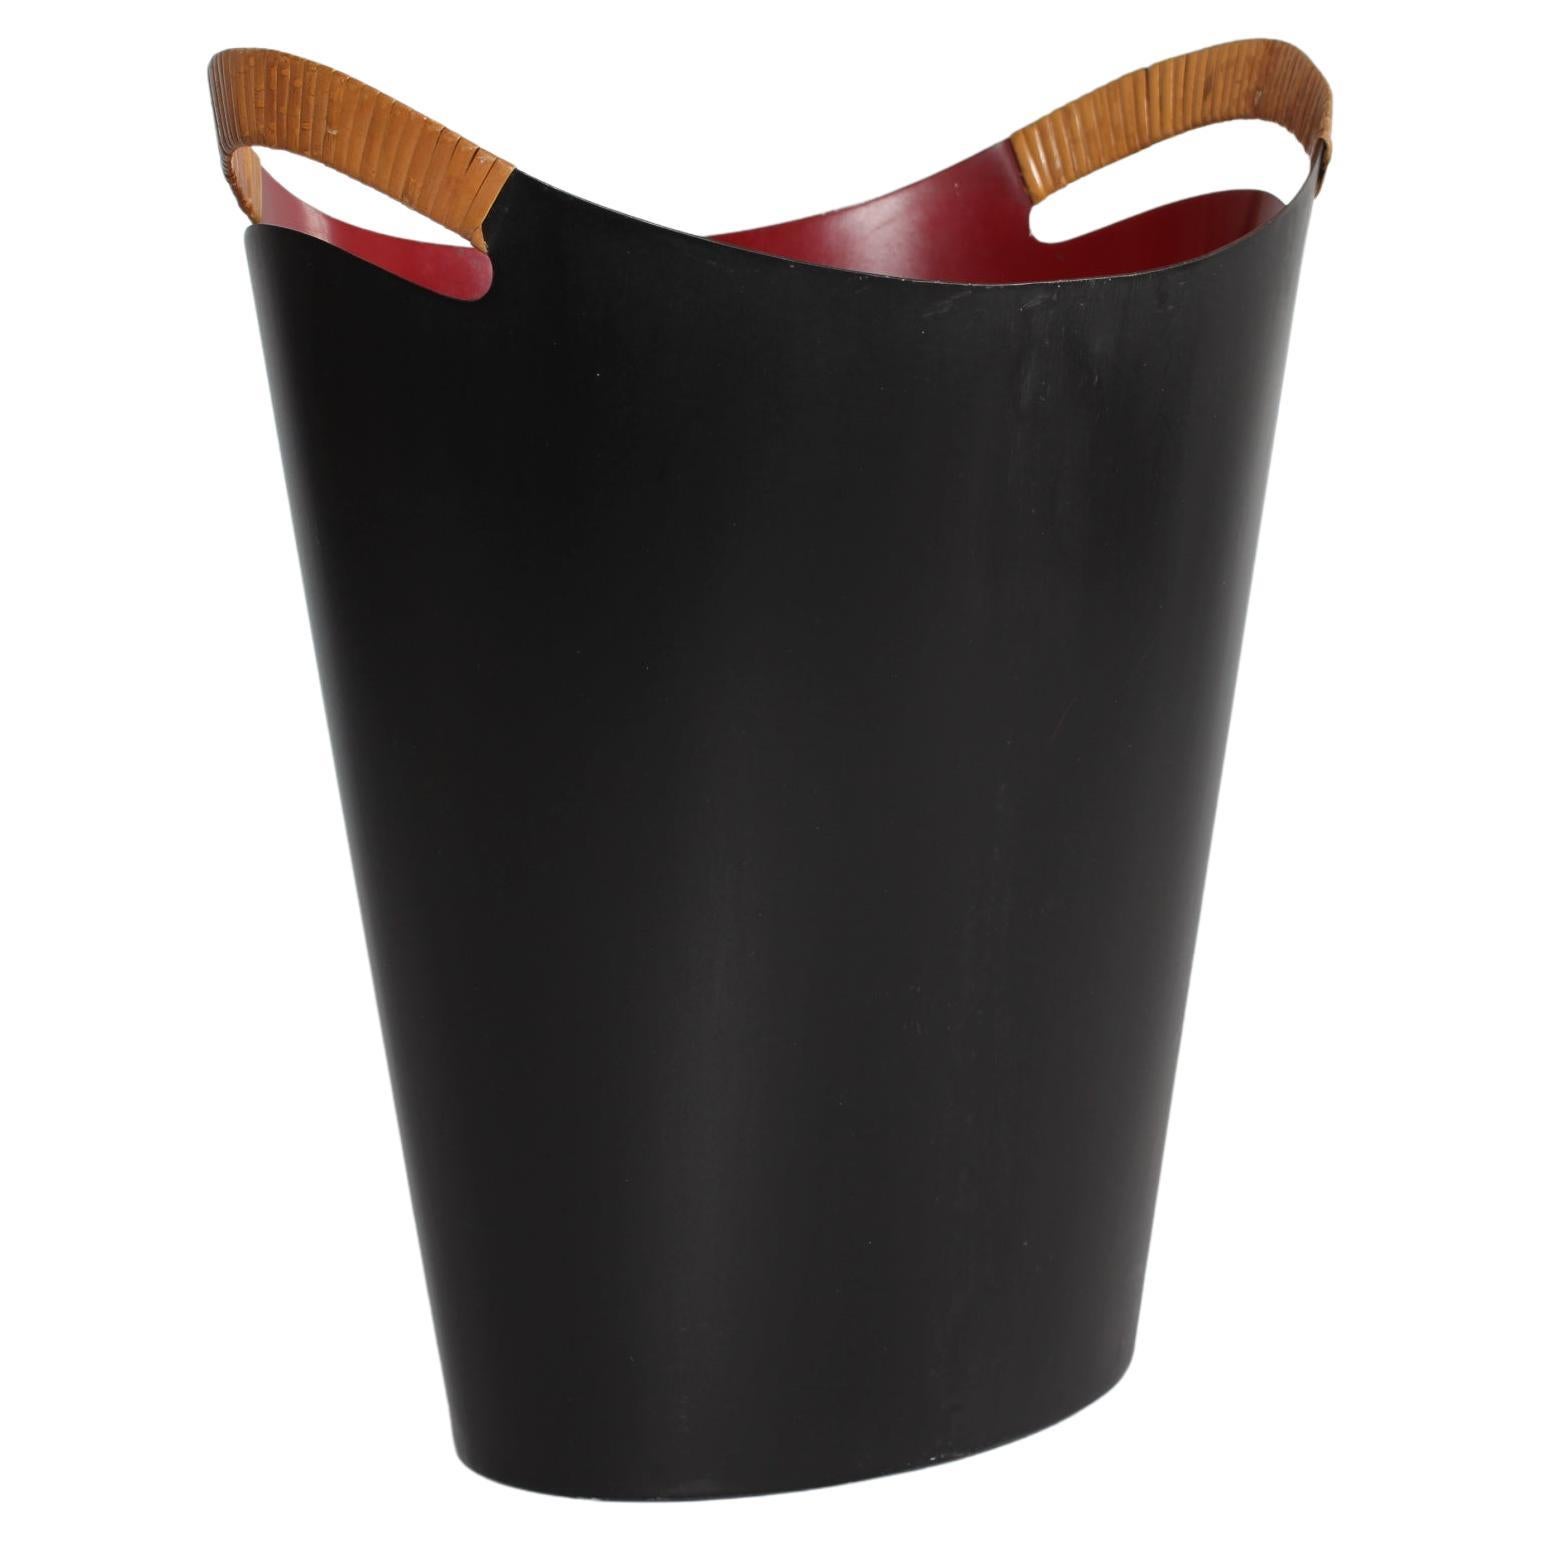 Danish vintage waste paper bin designed by Grete Kornerup-Bang and manufactured by Torben Ørskov.
This bin is made of metal with black and oxblood red lacquer which is rare to find.
Most of these bins are with black lacquer outside as well as